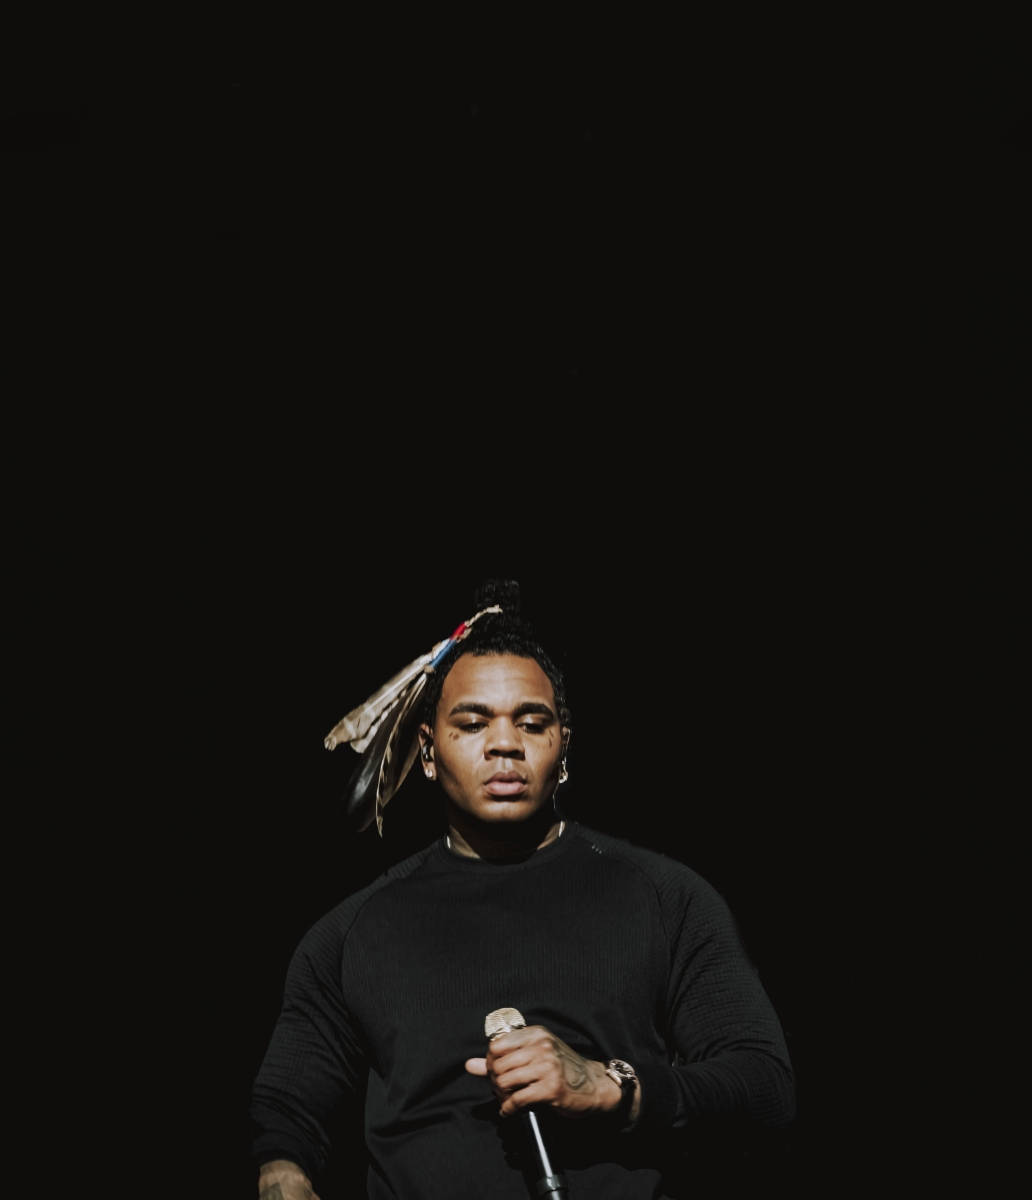 Kevin Gates Wallpapers 84 images